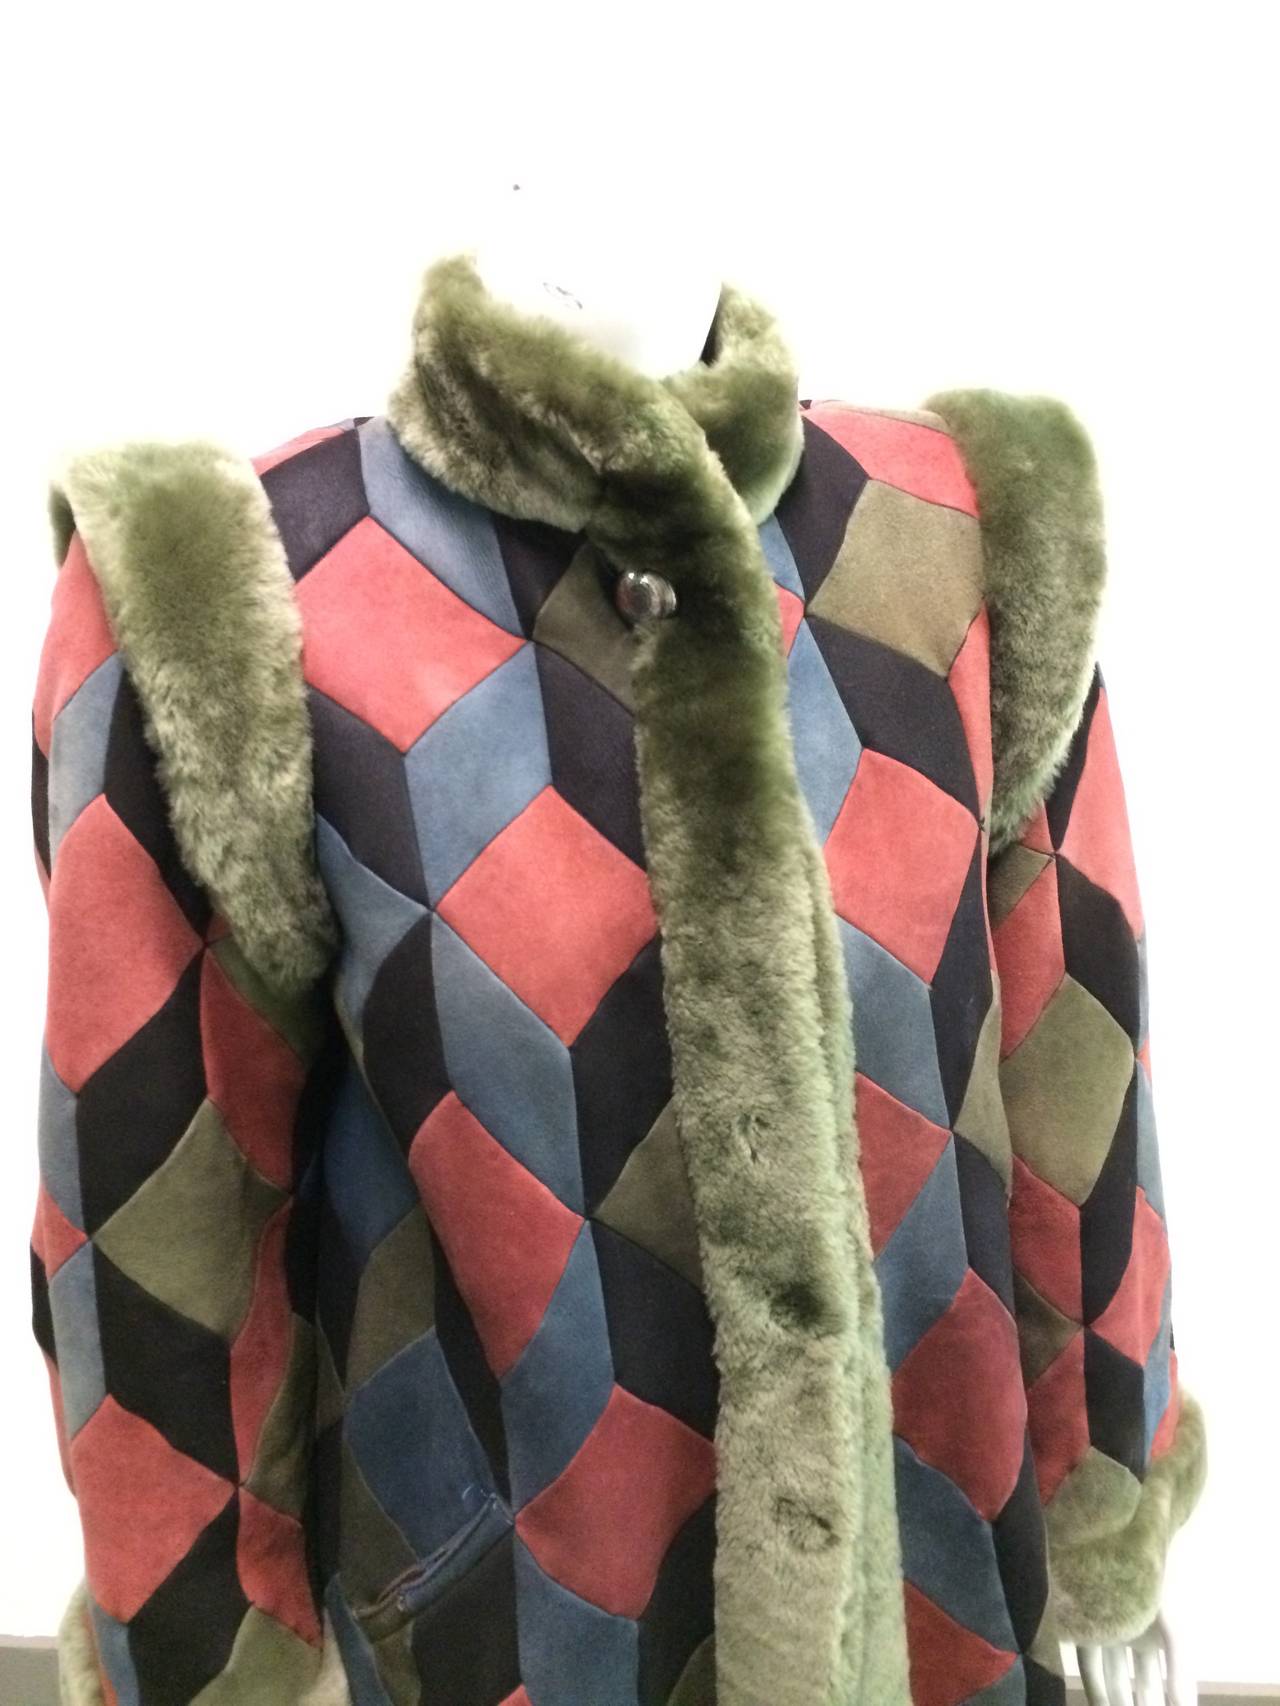 Christian Dior 70s abstract leather patchwork coat shearling faux fur trim and lining made in France. This breathtaking 70s Dior piece is a perfect example of why this couture house has stood the test of time. The abstract diamond pattern and